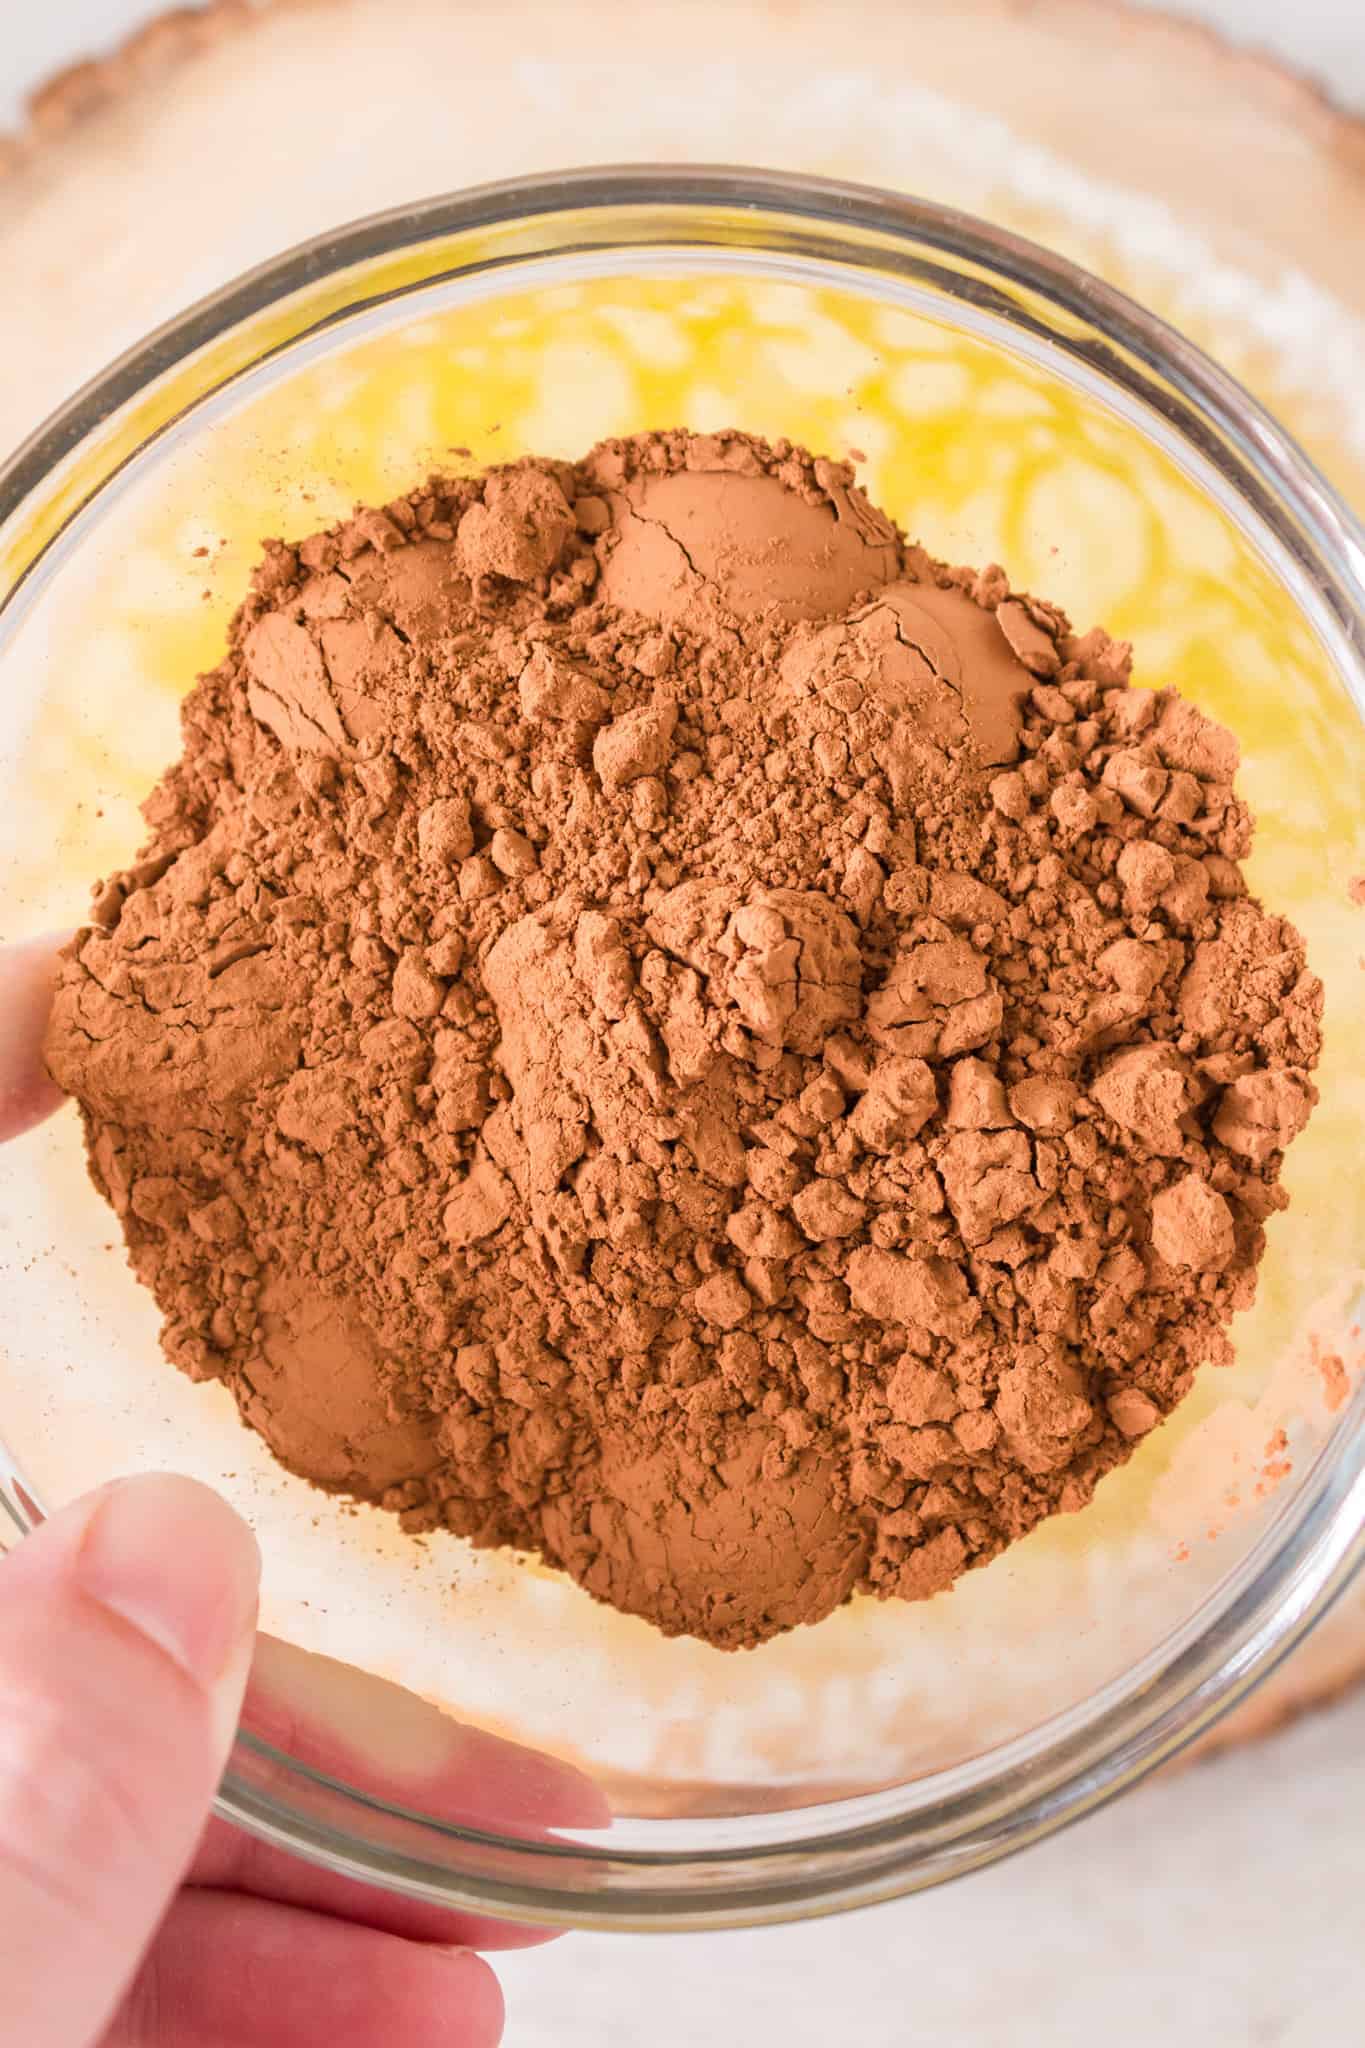 melted butter and cocoa powder in a mixing bowl